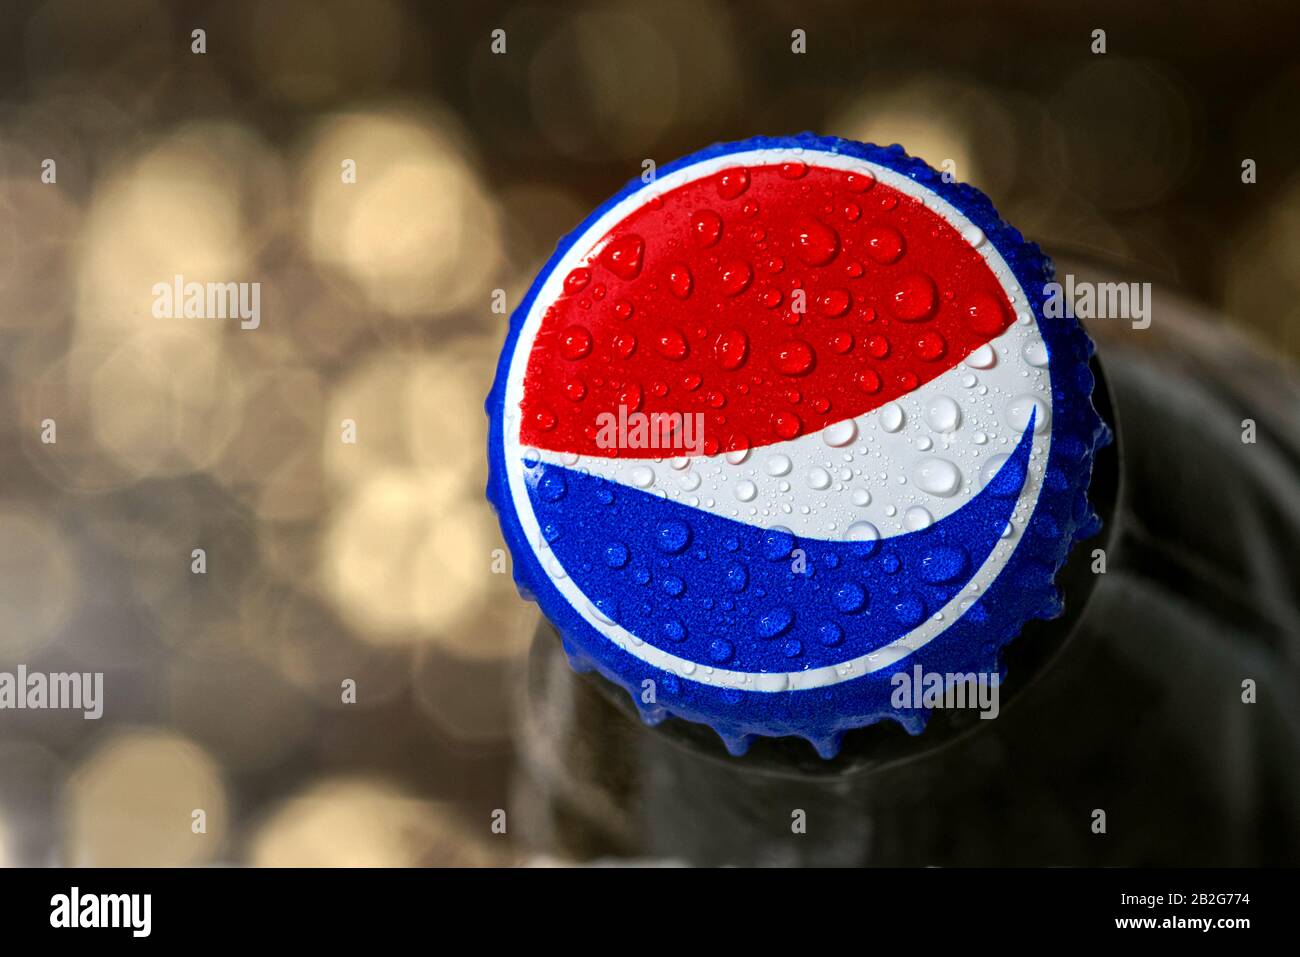 Koszalin, Poland - March 3, 2020: closed Pepsi glass bottle close up. Pepsi is popular carbonated soft drink manufactured by PepsiCo Stock Photo